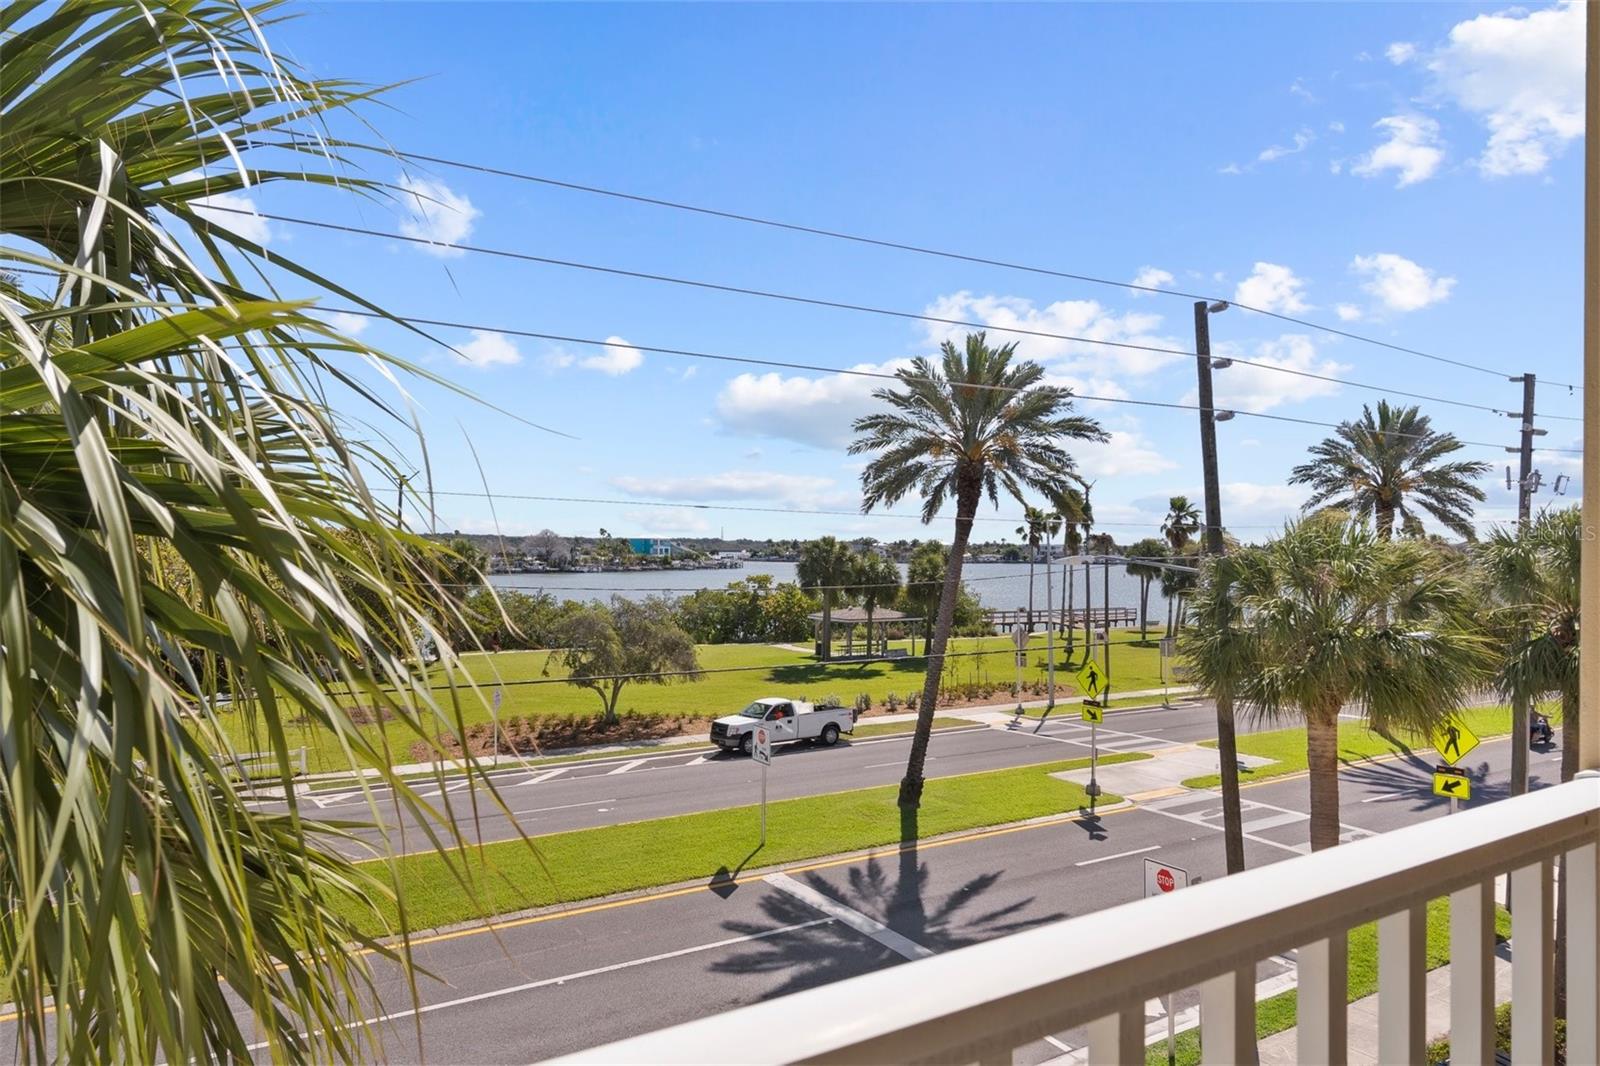 2nd Floor Eastern Balcony from Master Bedroom. Another fantastic spot for morning coffee.  Photo does not do justice of view in person. Crosswalk in photo offers easy access to water font park where you can exercise, kayak, paddleboard or fish.